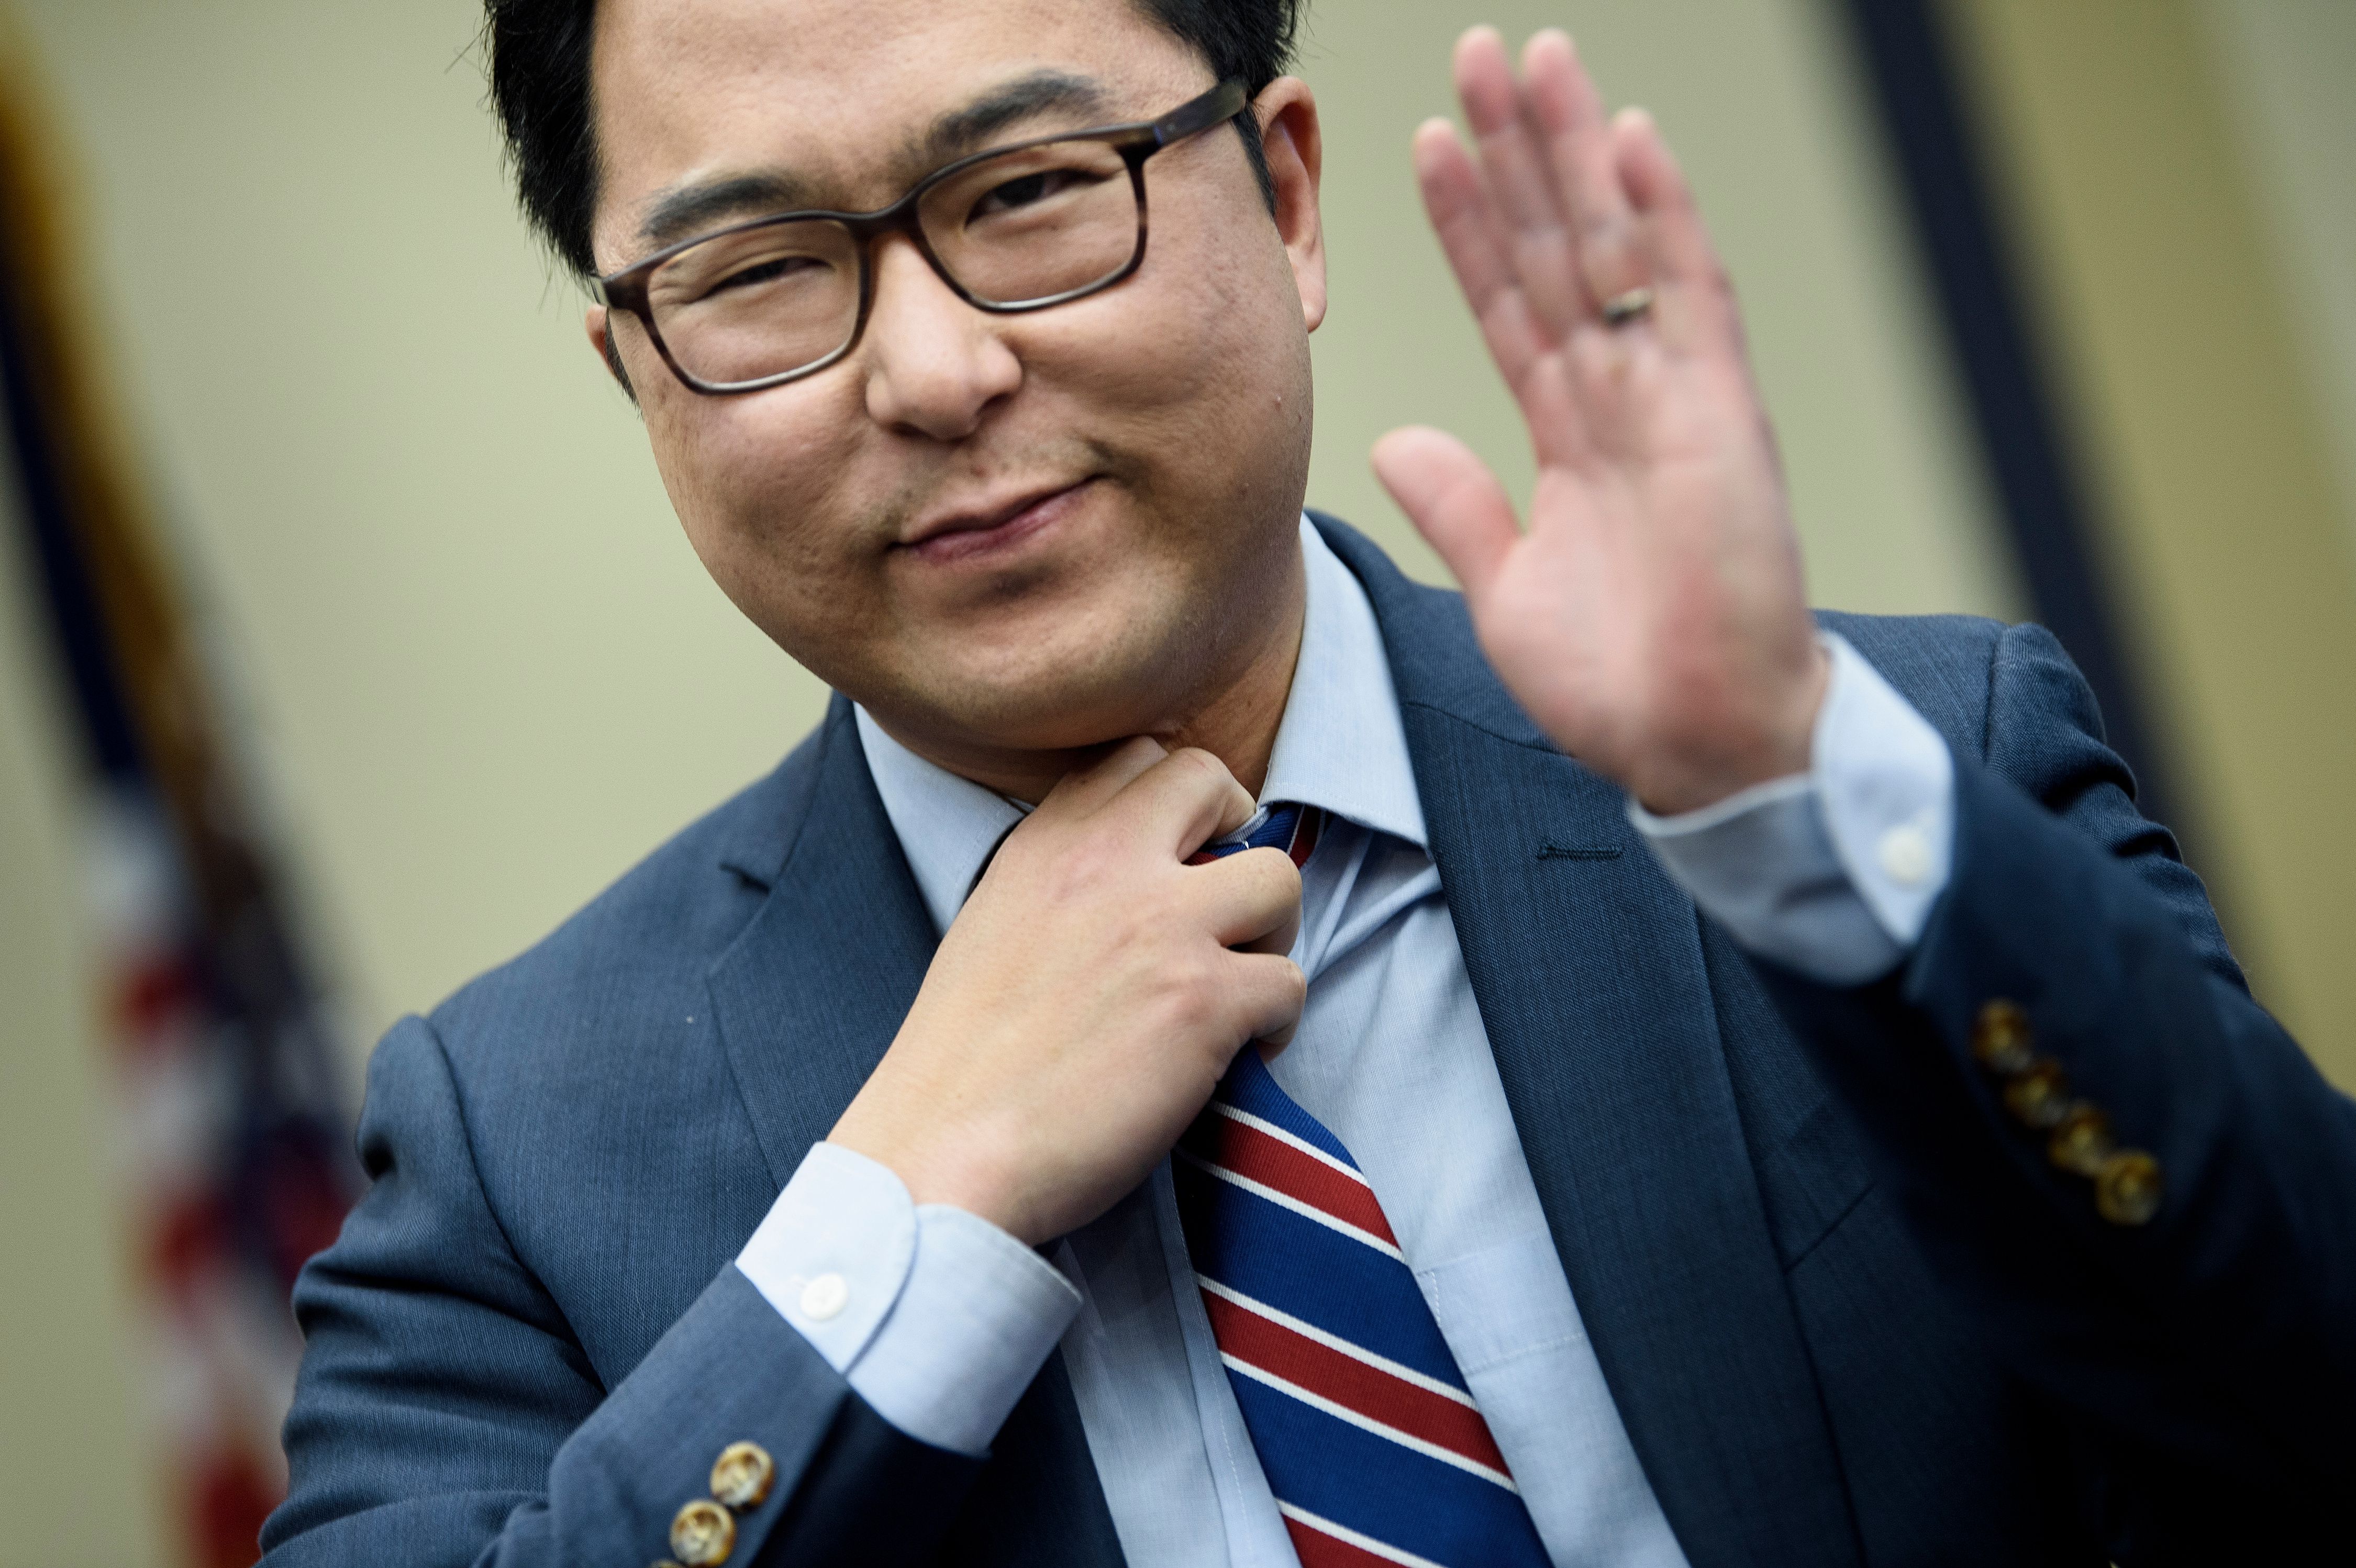 Rep. Andy Kim smiling and holding up his hand.